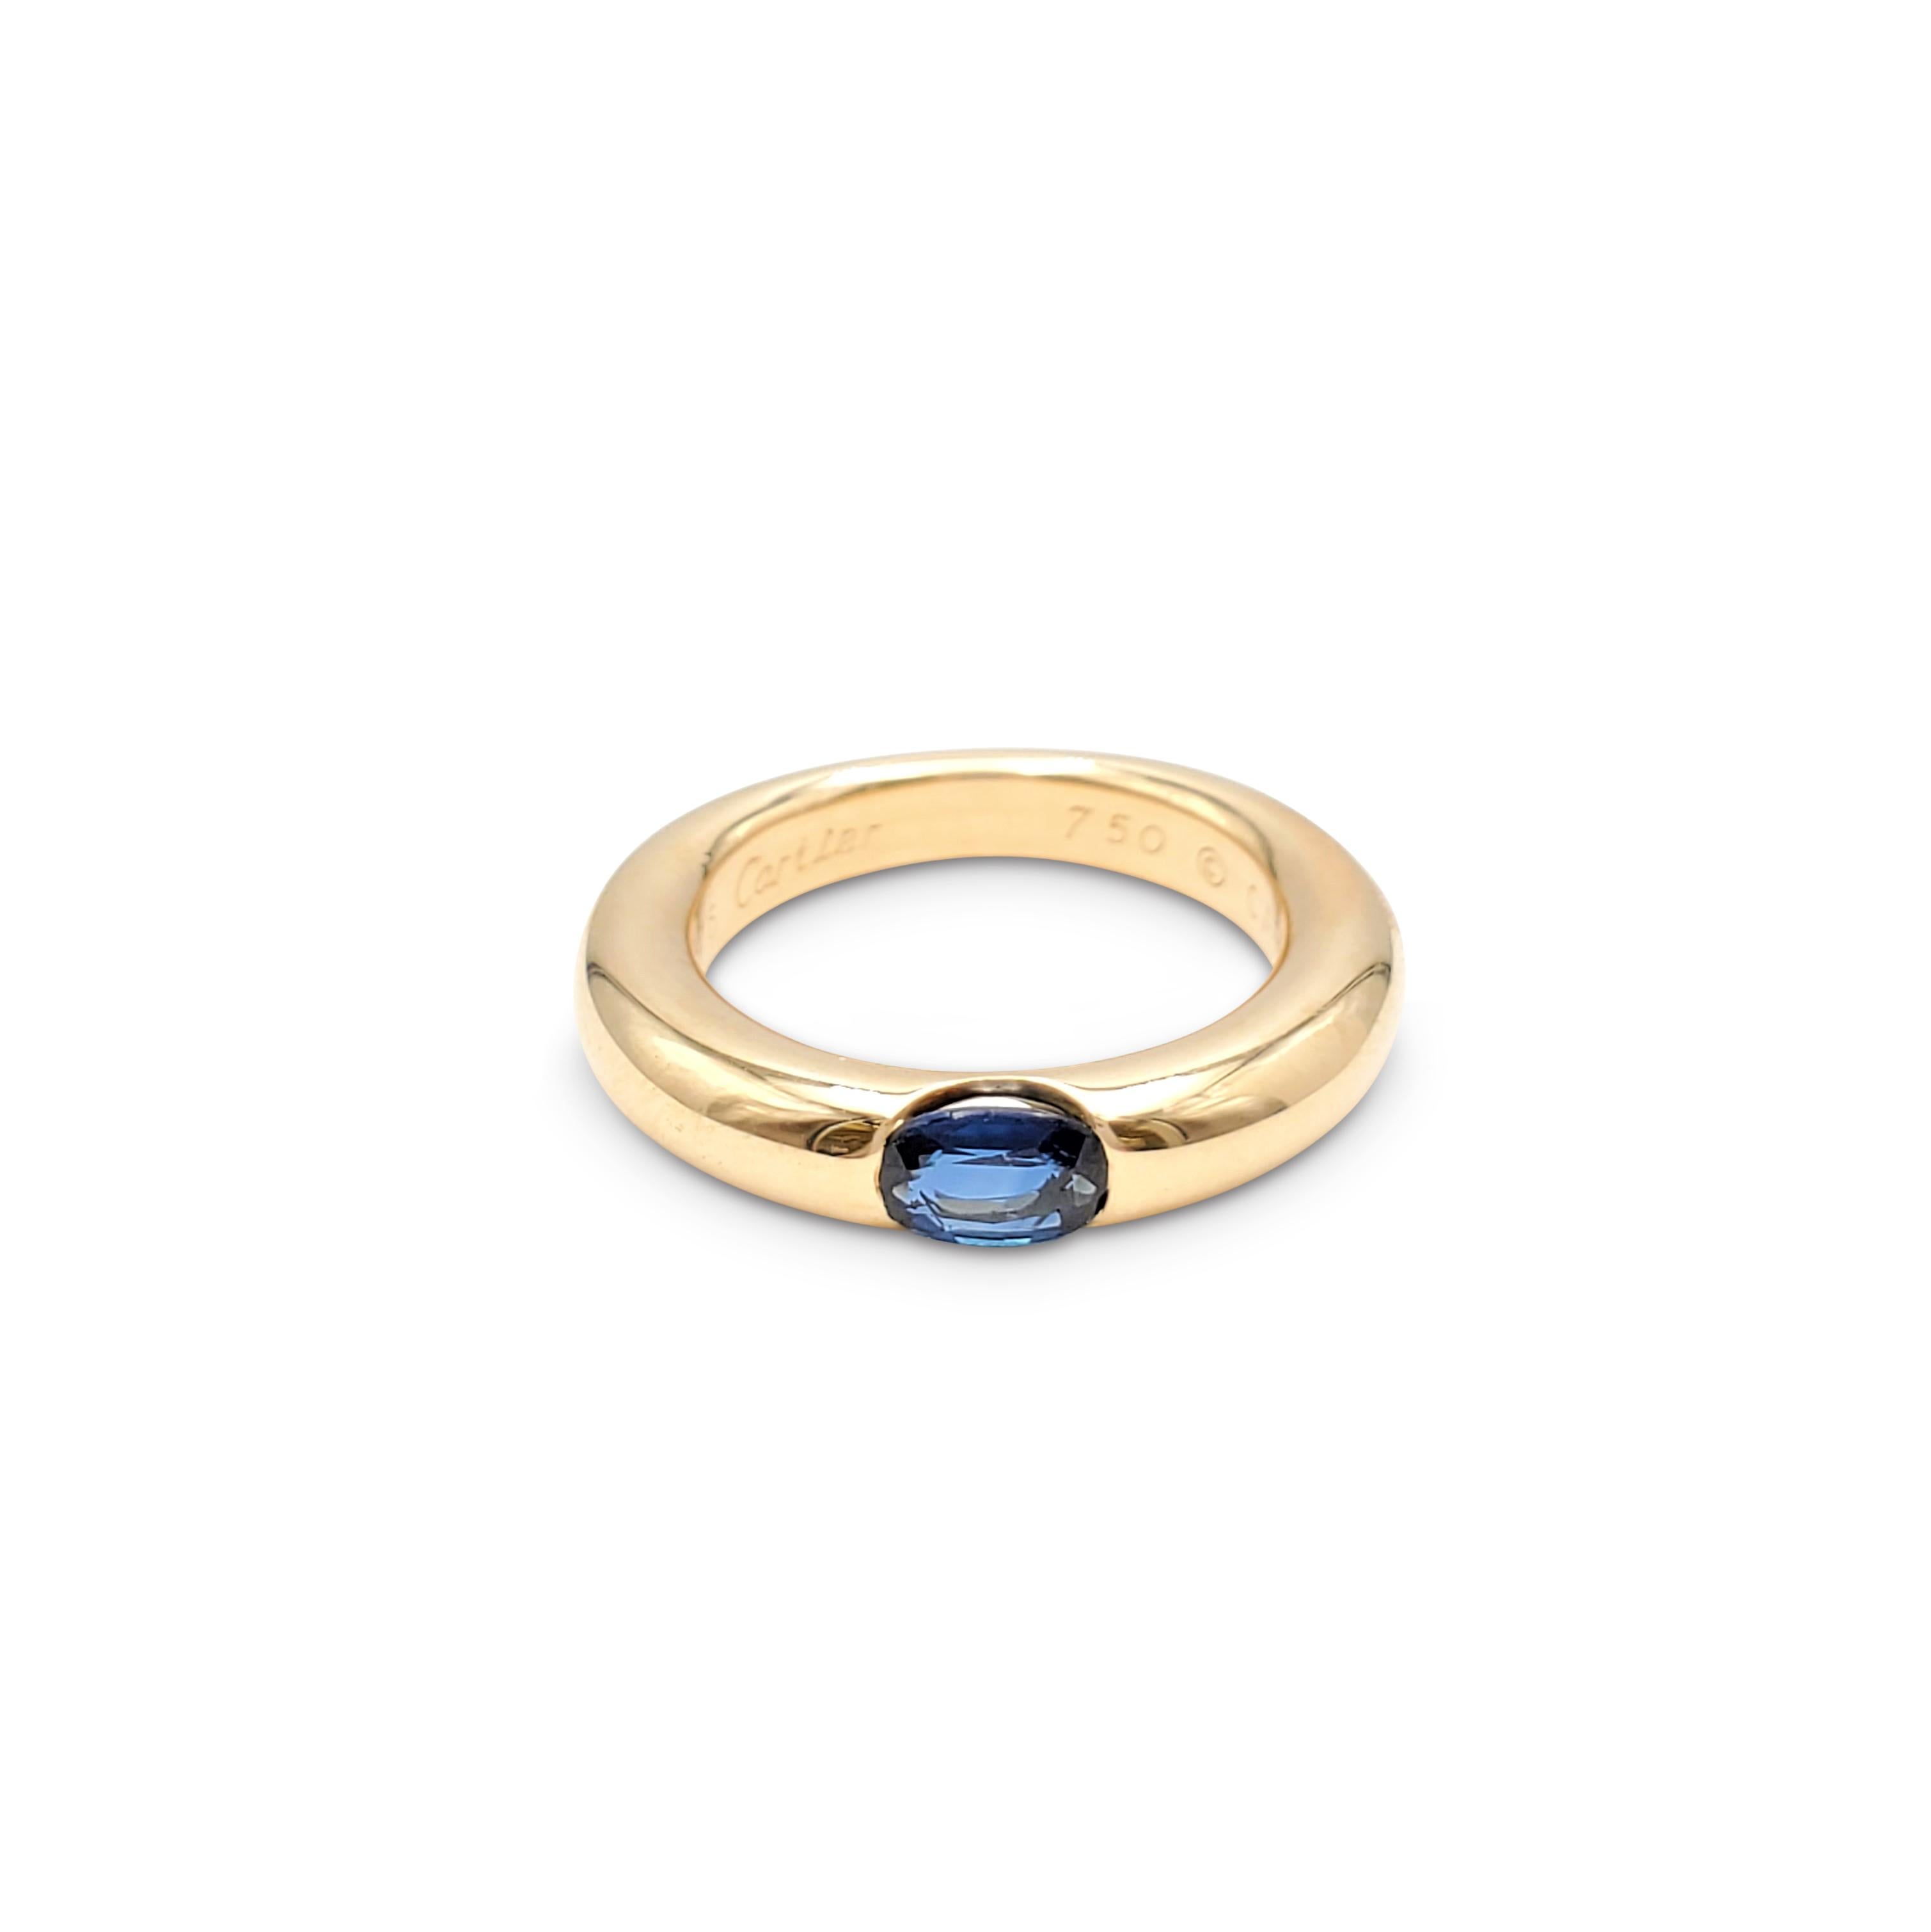 Authentic Cartier 'Ellipse' ring crafted in 18 karat yellow gold and set with one blue sapphire weighing an estimated 0.35 carats total weight. Signed Cartier 1992, 750, 49, with serial number. The ring is presented with the original papers, no box.